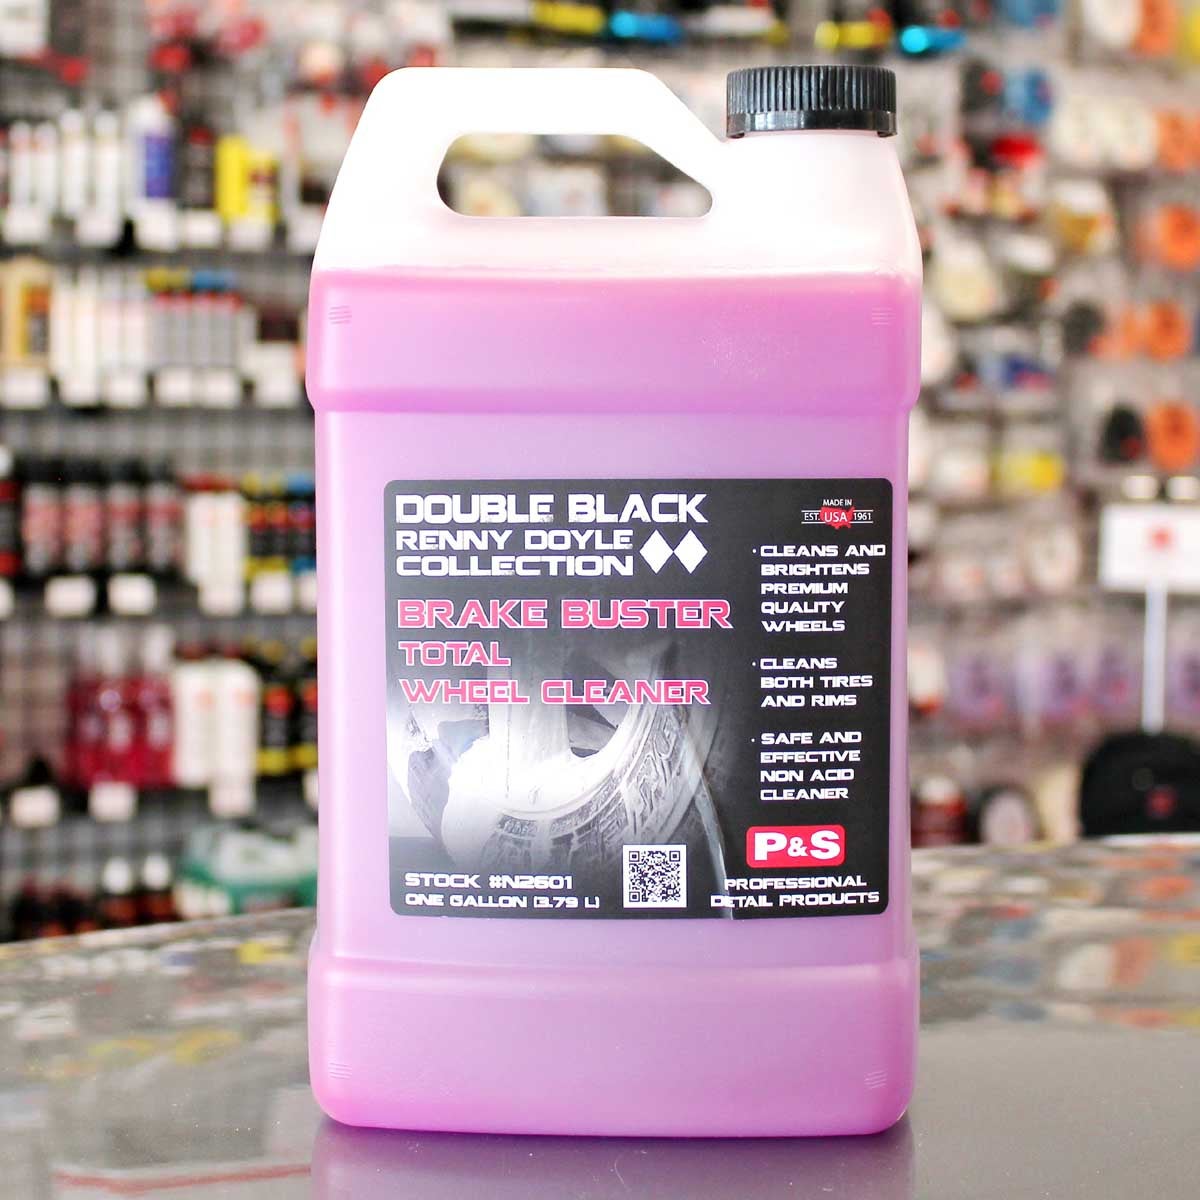 P & S PROFESSIONAL DETAIL PRODUCTS P&S Professional Detail Products - Brake  Buster Wheel cleaner - Non Acid